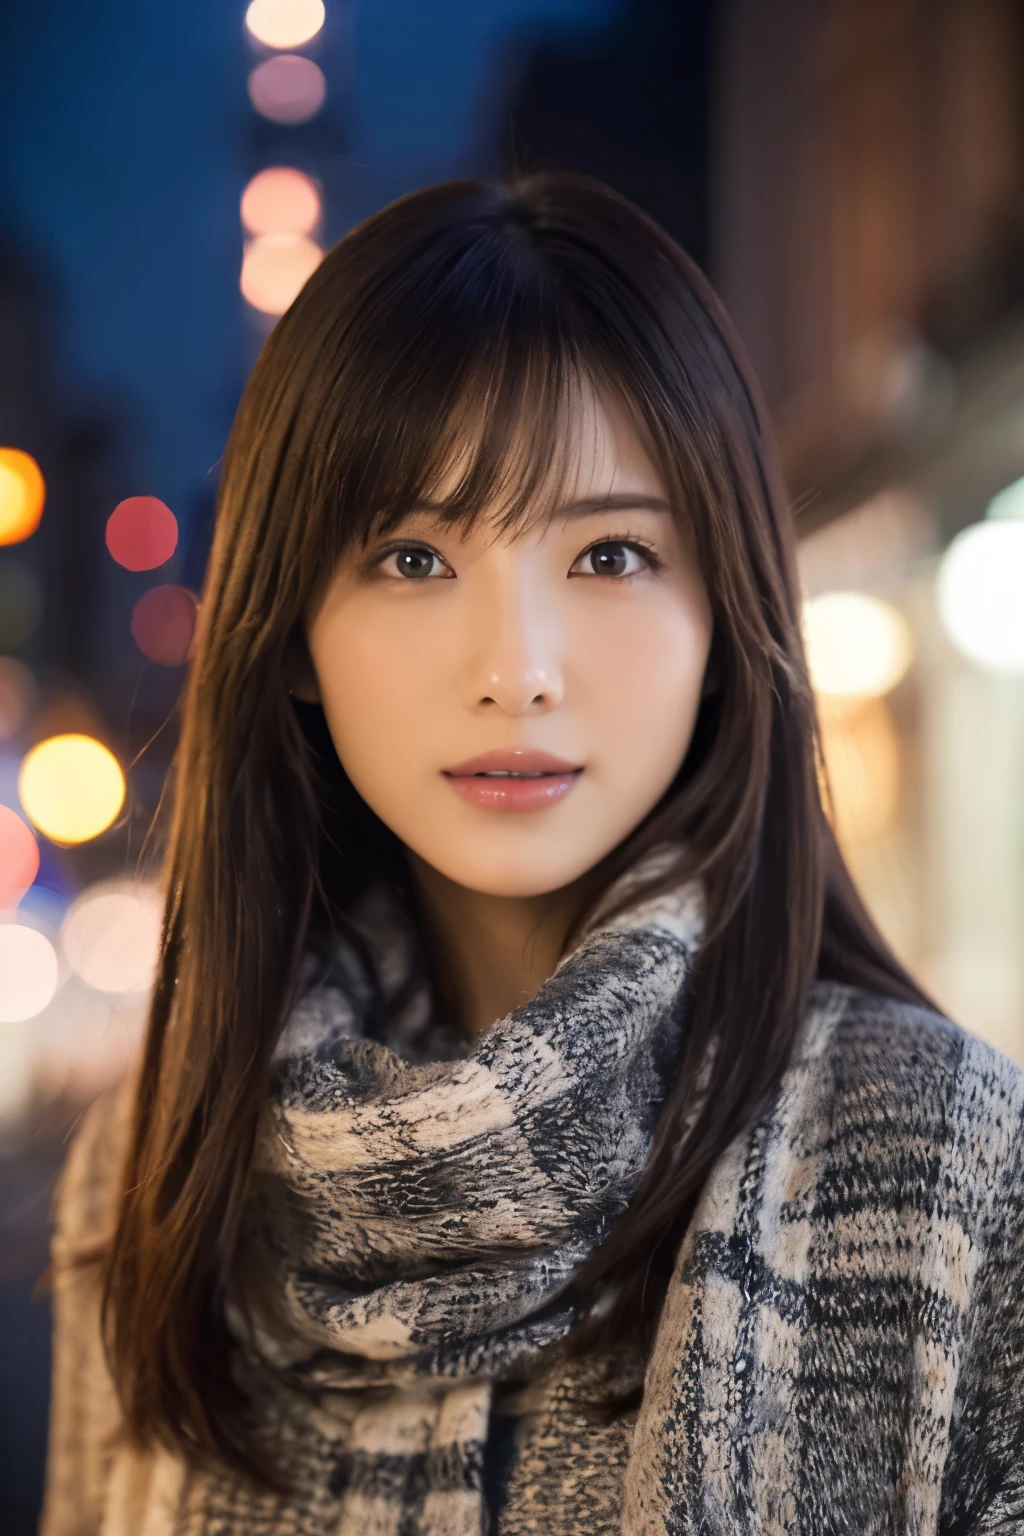 1girl in, (Wear winter clothes:1.2), 
(Raw photo, Best Quality), (Realistic, Photorealsitic:1.4), masutepiece, 
Extremely delicate and beautiful, Extremely detailed, 2k wallpaper, amazing, finely detail, 
the Extremely Detailed CG Unity 8K Wallpapers, Ultra-detailed, hight resolution, Soft light, 
Beautiful detailed girl, extremely detailed eye and face, beautiful detailed nose, Beautiful detailed eyes, Cinematic lighting, 
Winter Night View, Roppongi Hills street trees with lots of illuminations, It's snowing,
Perfect Anatomy, Slender body,
Straight semi-long hair, Bangs, Looking at Viewer, A slight smil